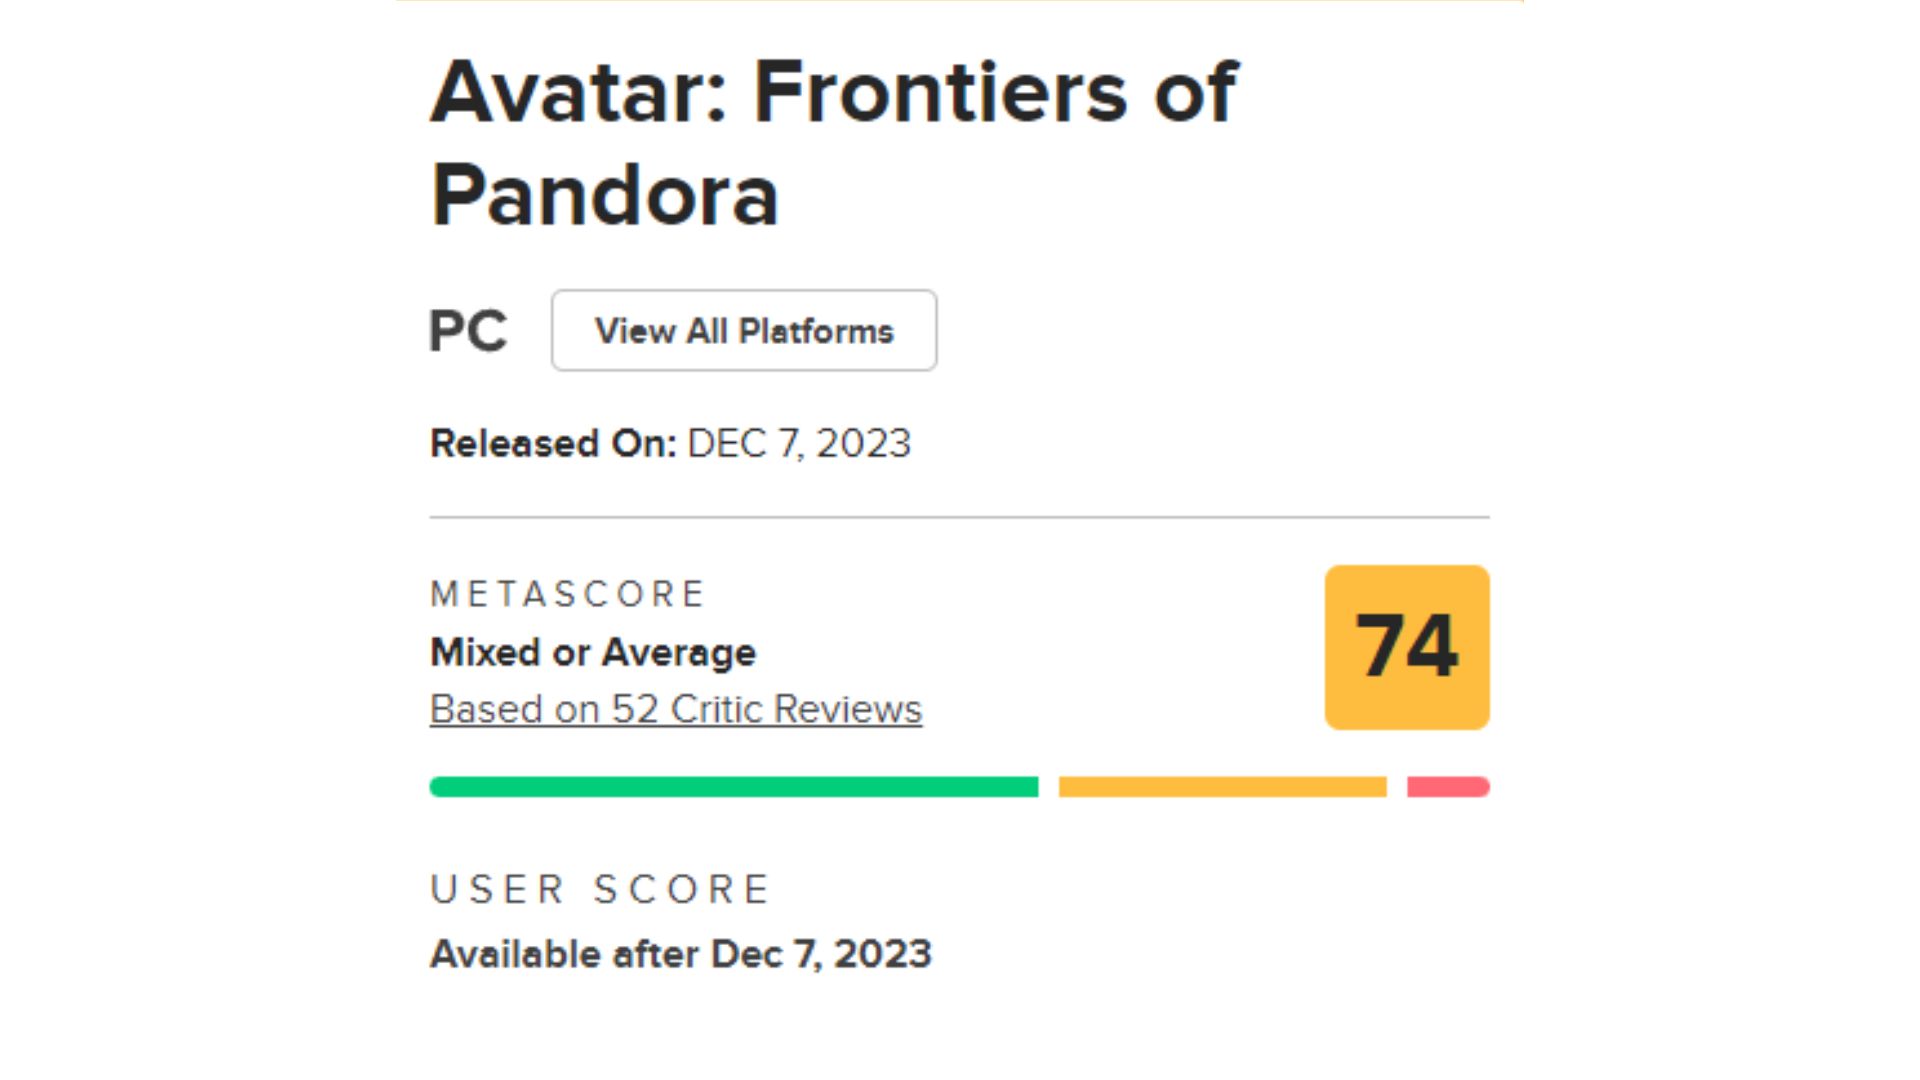 Avatar: Frontiers of Pandora scored a 74 on Metacritic based on 52 critic reviews.